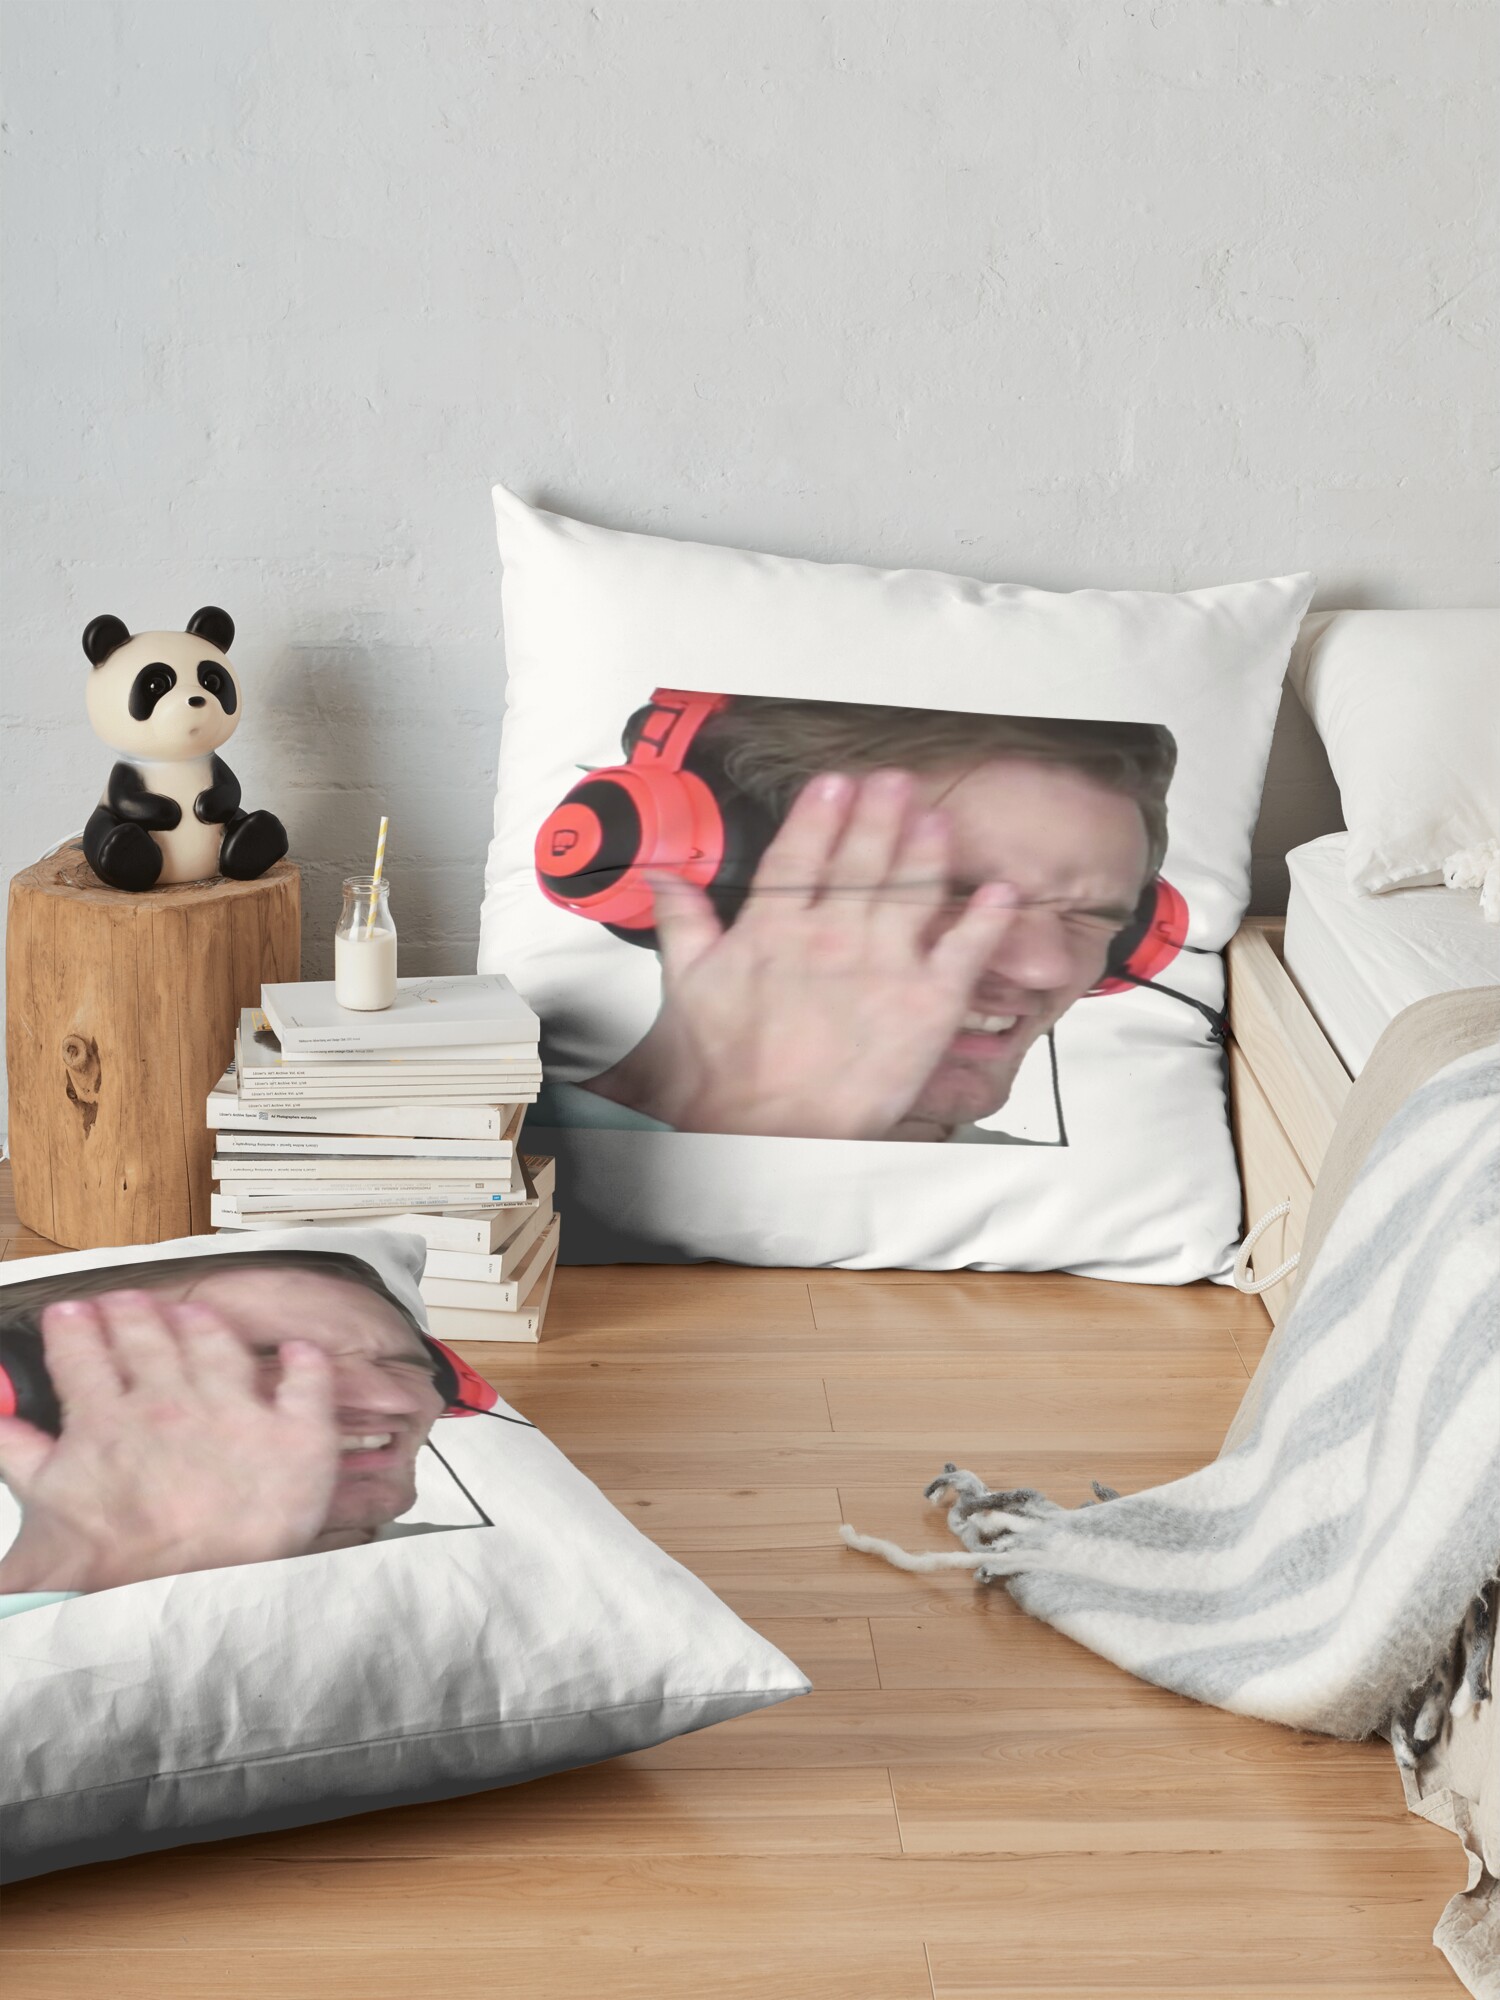 throwpillowsecondary 36x362000x2000 bgf8f8f8 4 - Pewdiepie Store